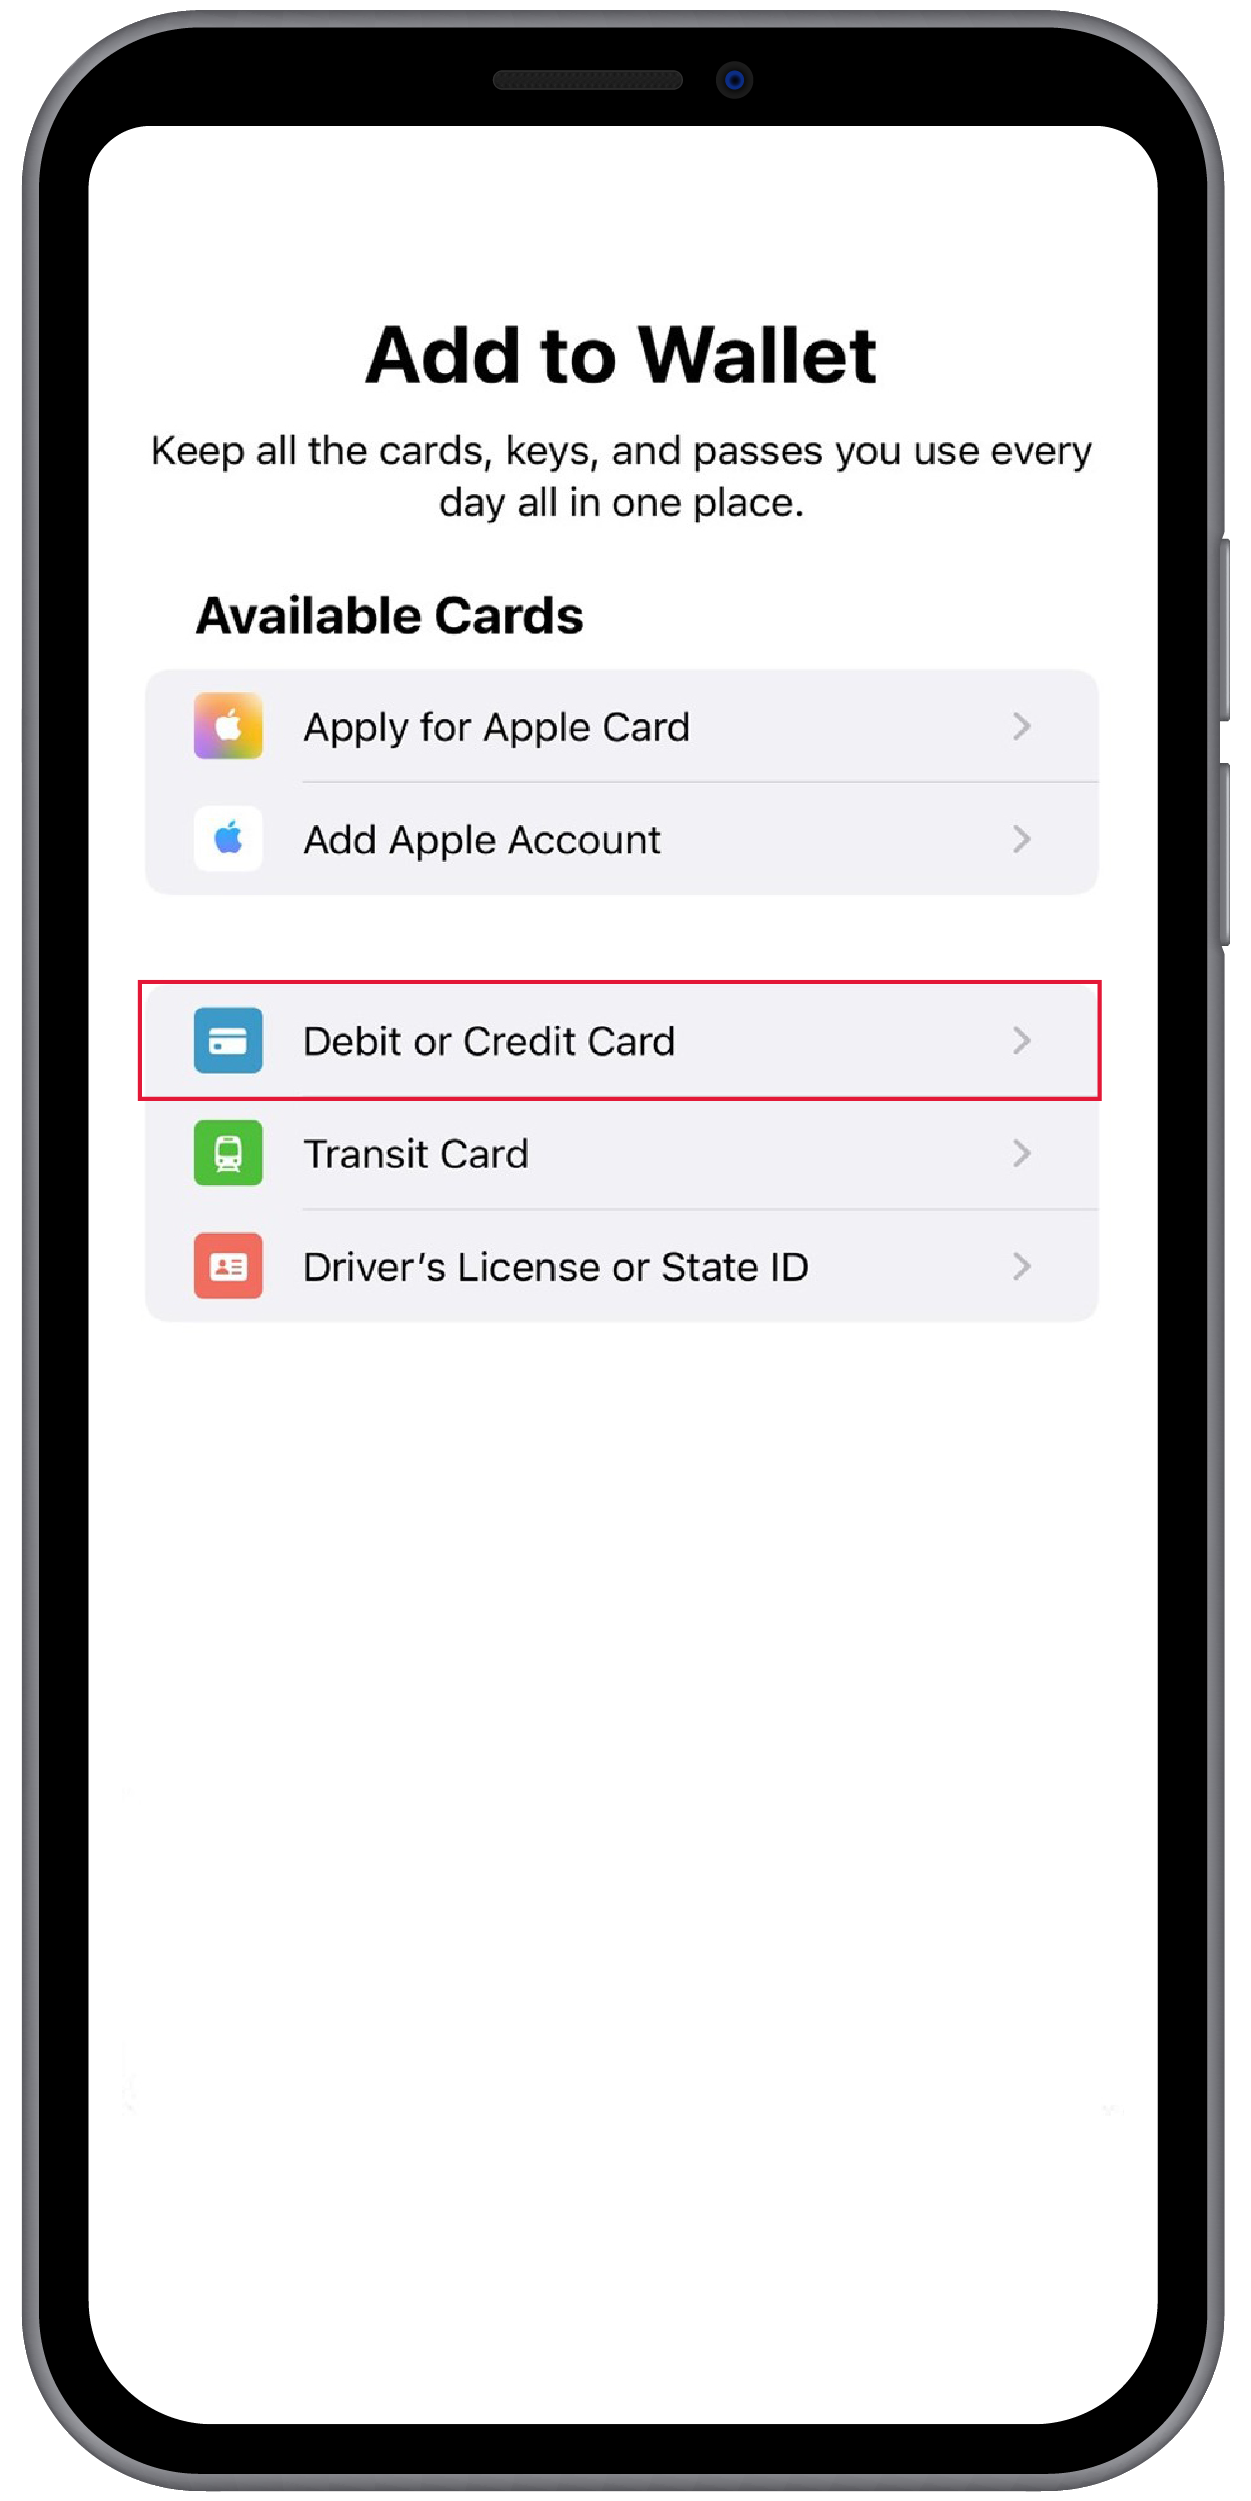 Add to Wallet” screen showing options to add a card, including “Apply for Apple Card”, “Add Apple Account”, “Debit or Credit Card”, “Transit Card”, and “Driver’s License or State ID”. A red outline around “Debit or Credit Card” indicates the option you would select to add your health and benefit debit card.